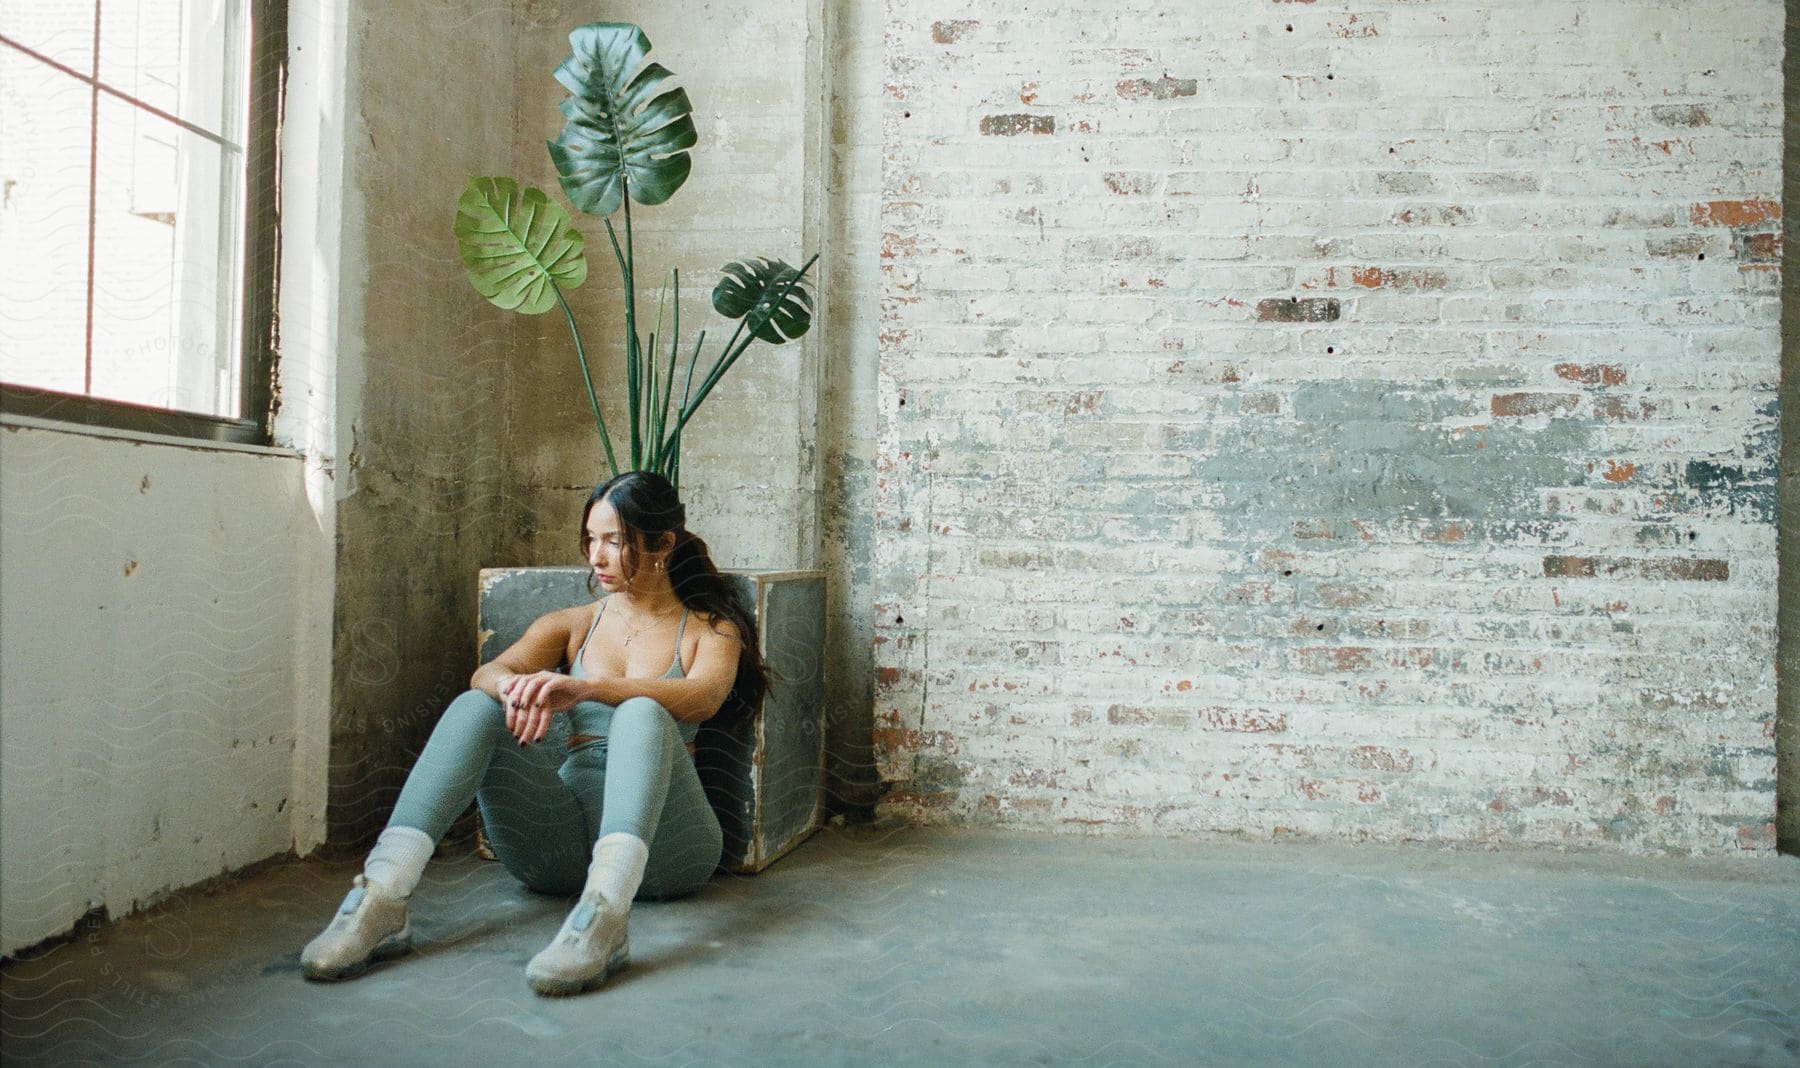 A woman with long dark hair is sitting by a wall with her elbow resting near a potted plant as she looks to her side